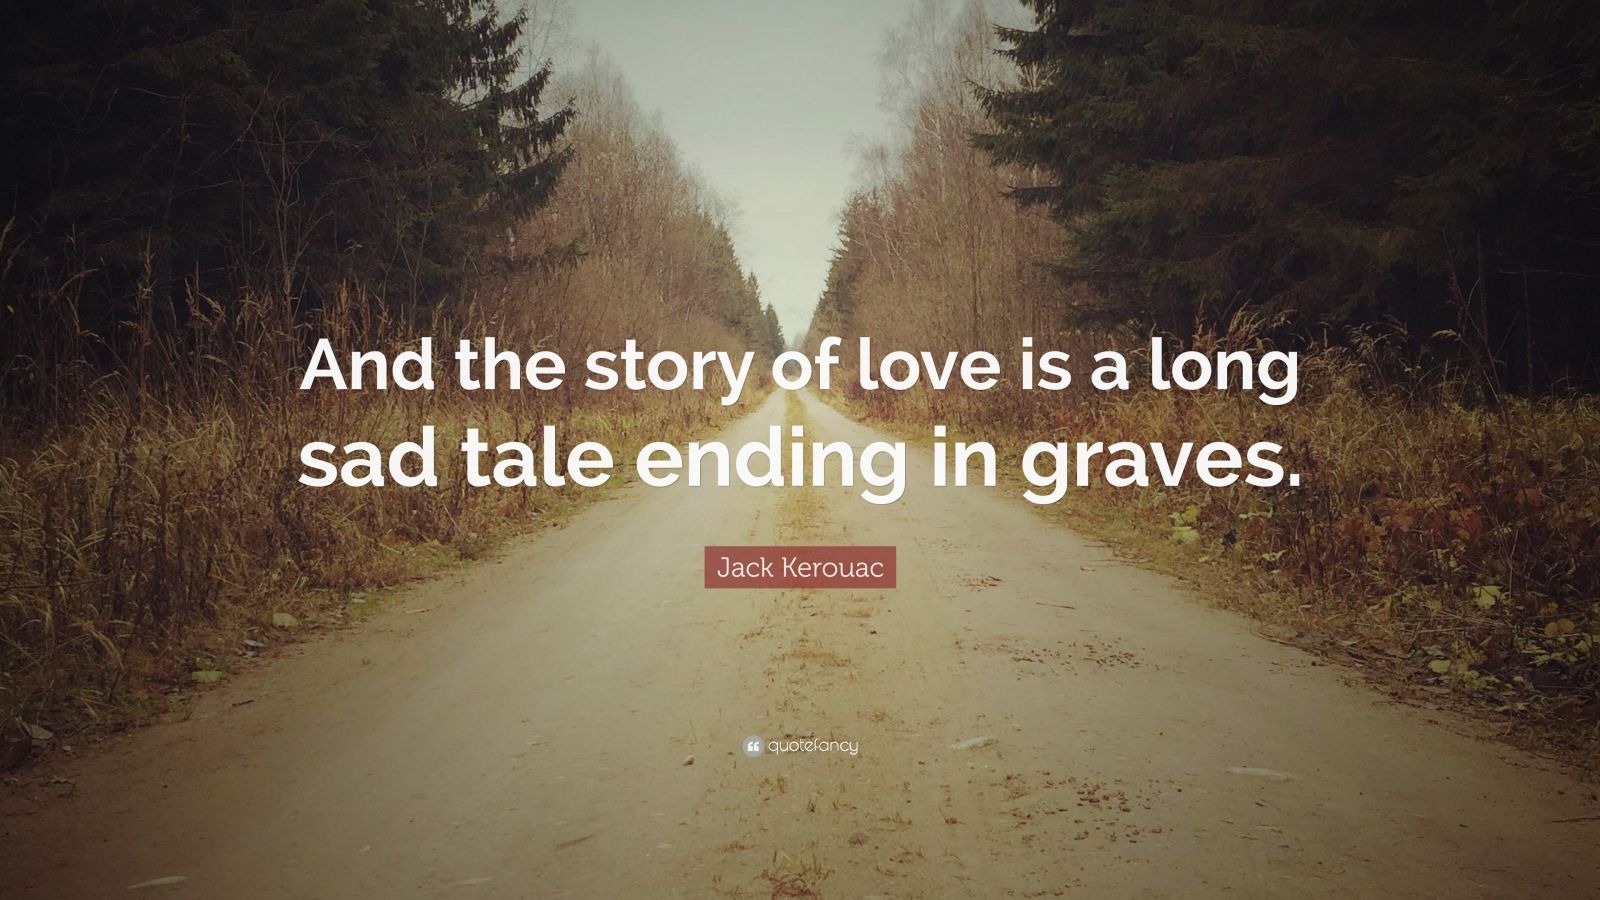 Jack Kerouac Quote: "And the story of love is a long sad ...